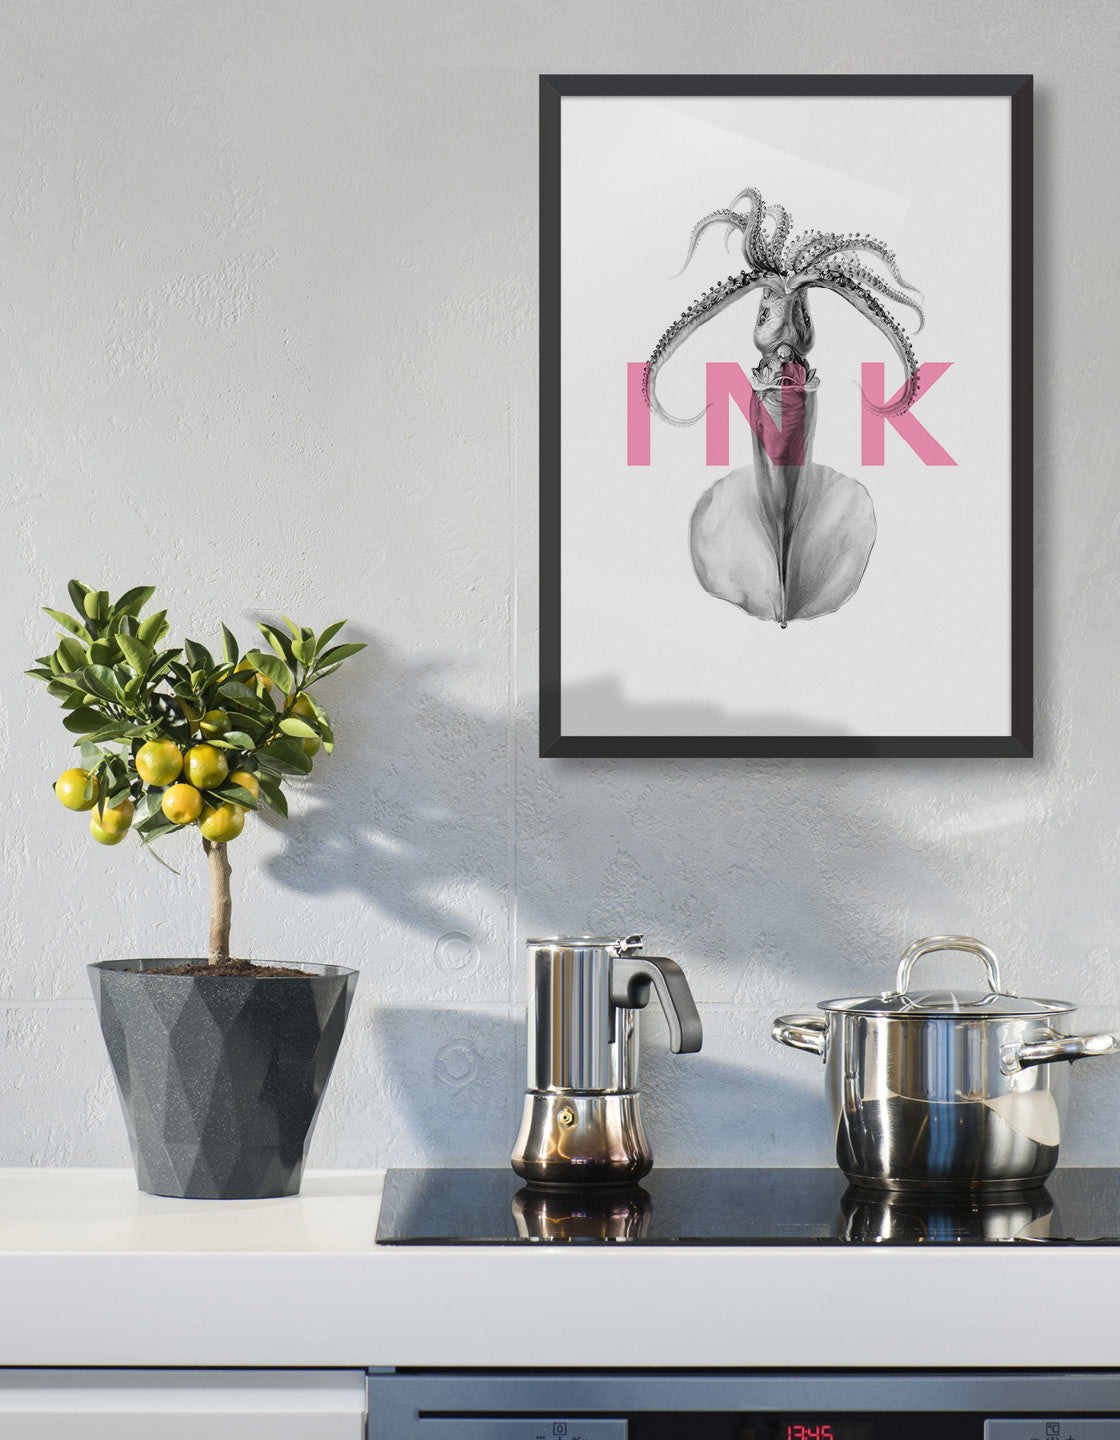 squid ink modern typography print. The word ink in pink text written horizontally over an image of a squid